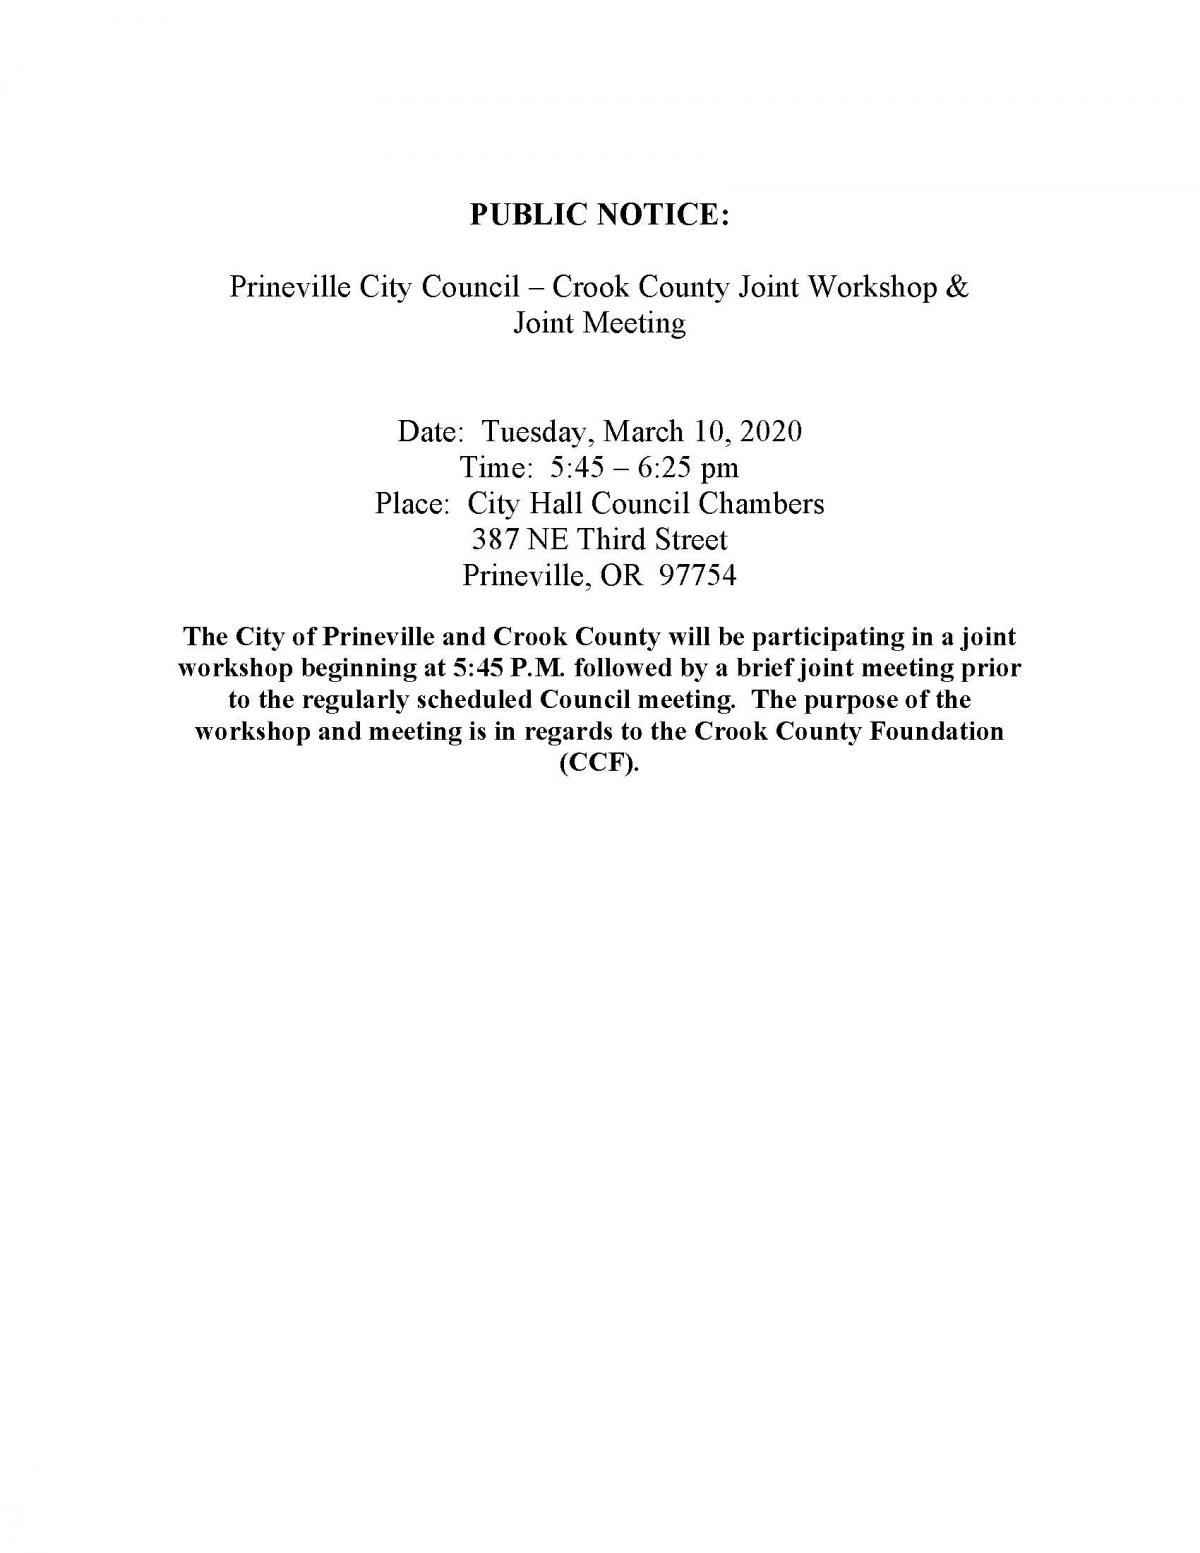 Public Notice - City / County Joint Workshop & Meeting 3-10-2020